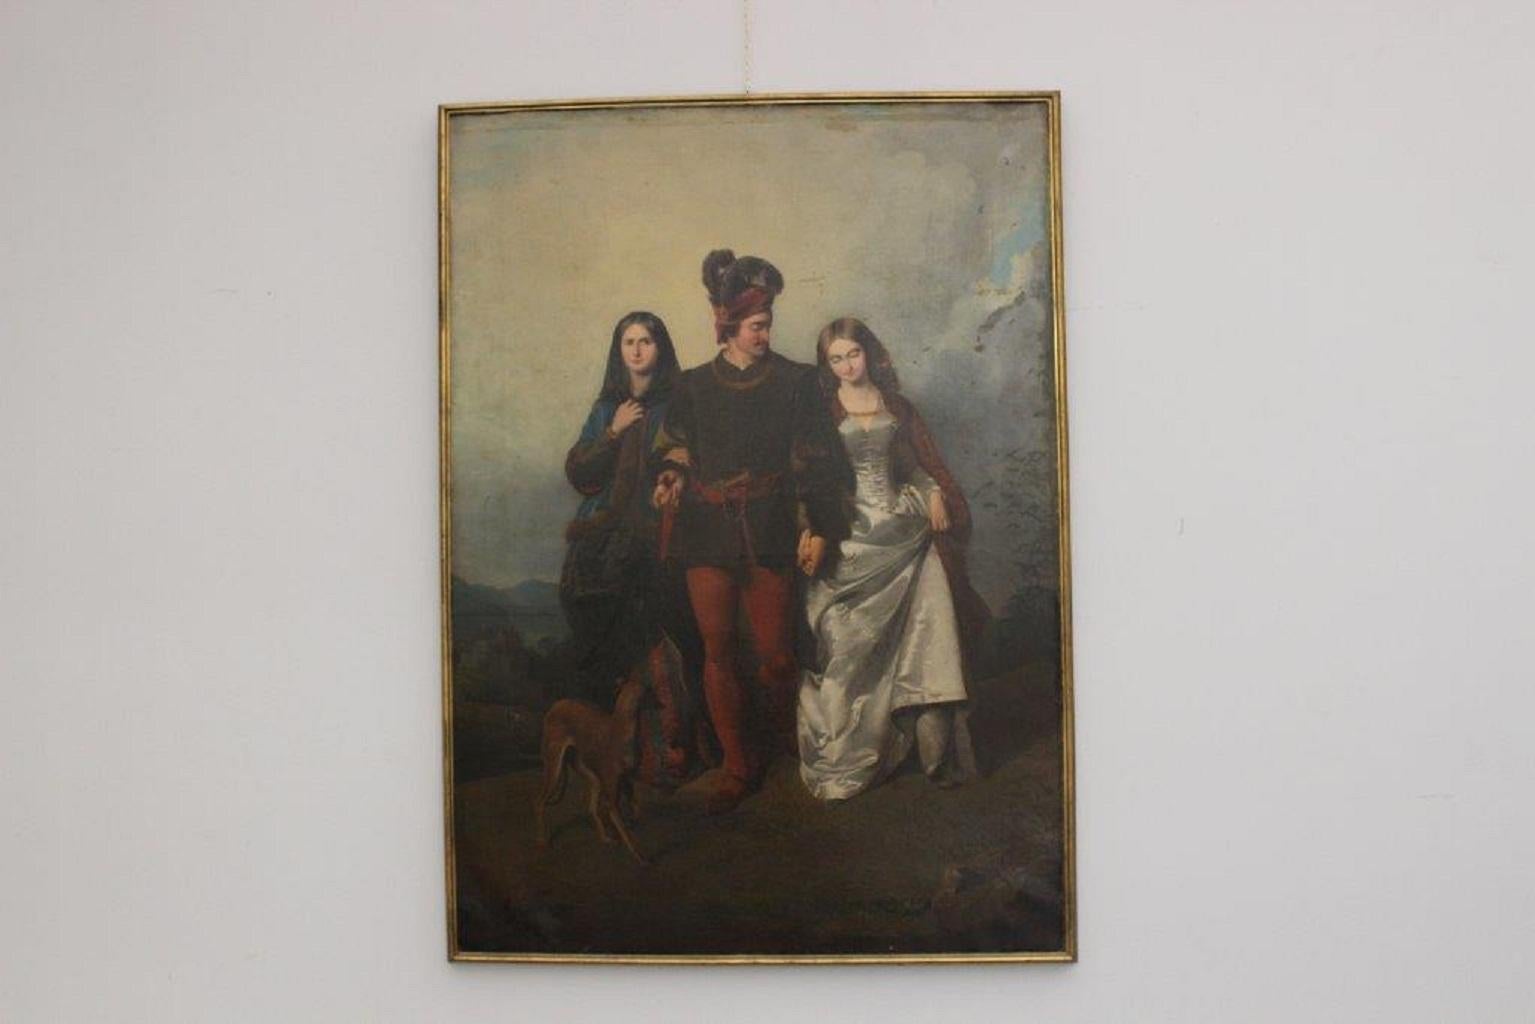 Amos Cassioli, painting on canvas La Rivale, Romanticism movement, 19th century. 
Packaging with bubble wrap and cardboard boxes is included. If the wooden packaging is needed (fumigated crates or boxes) for US and International Shipping, it's